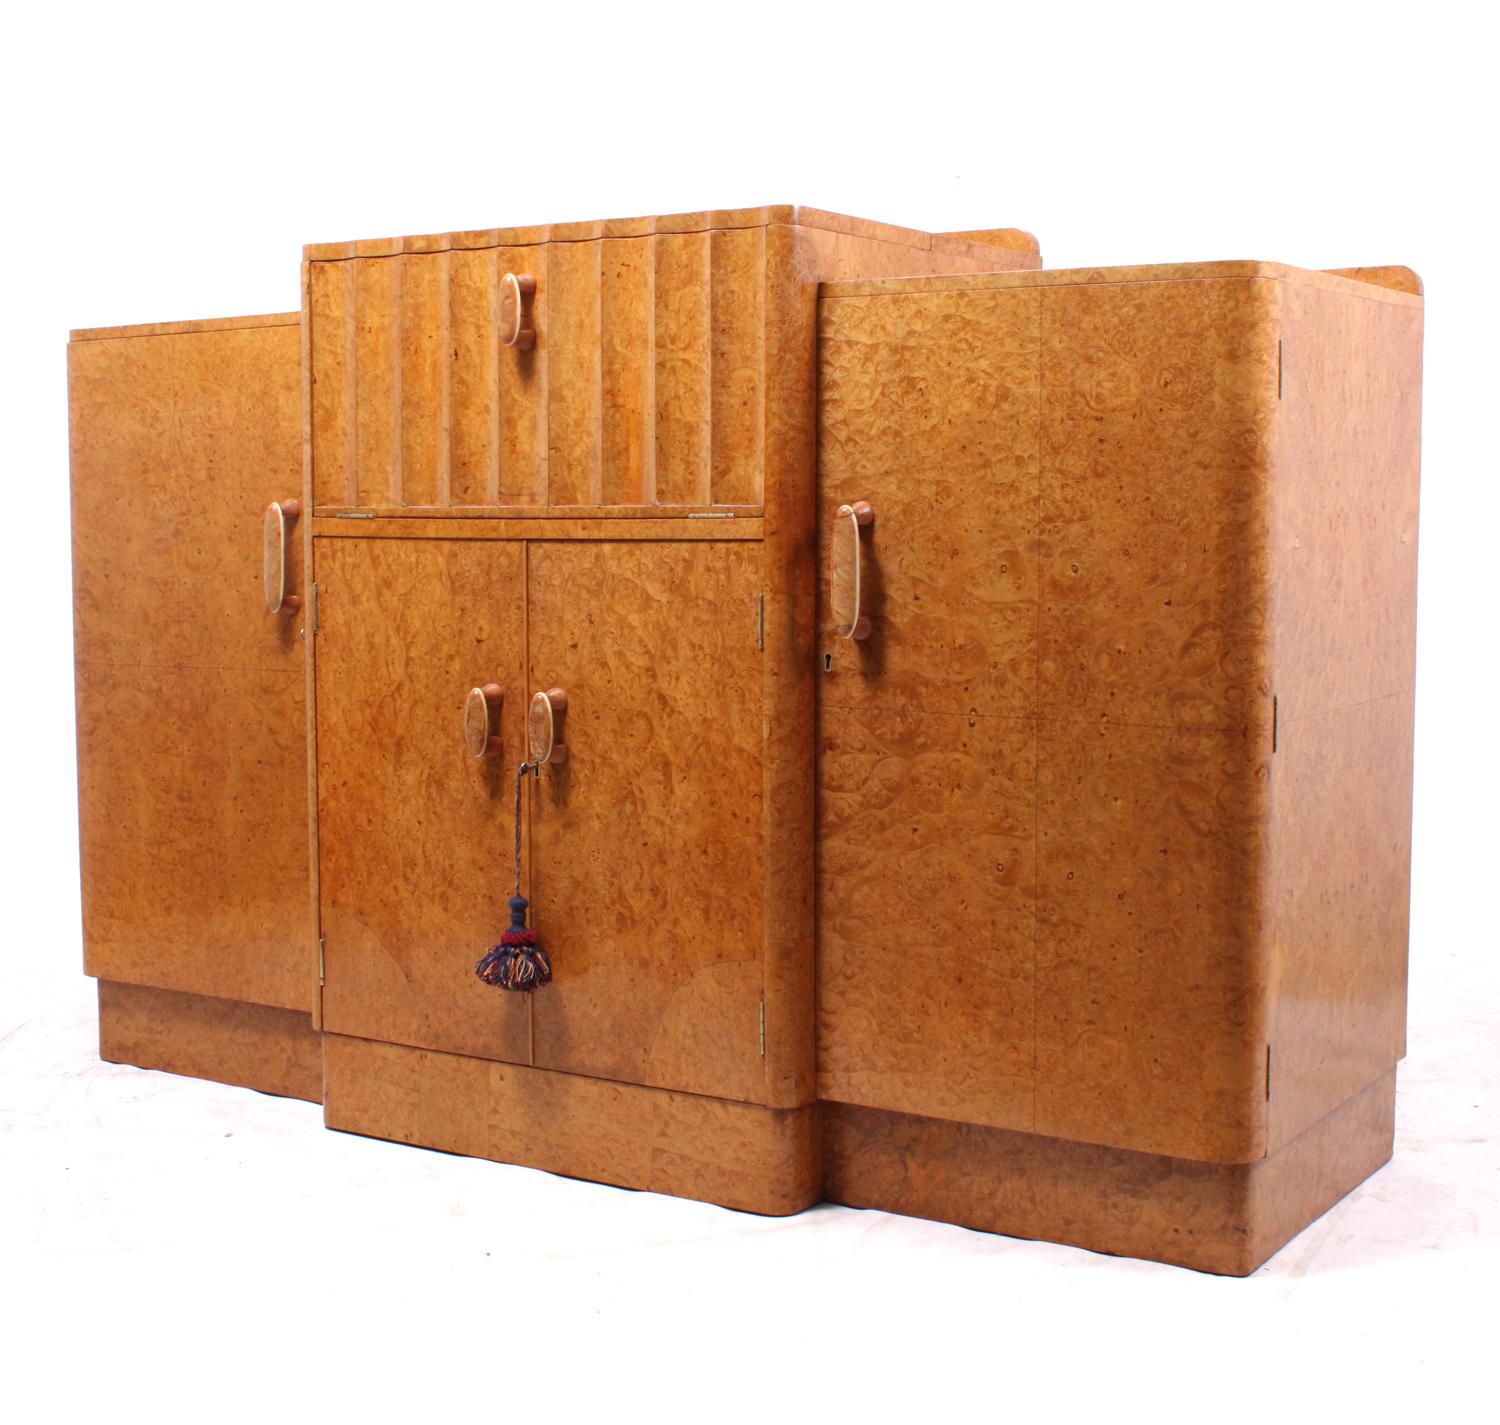 Art Deco Sideboard Cocktail in Burr Maple In Excellent Condition For Sale In Paddock Wood, Kent